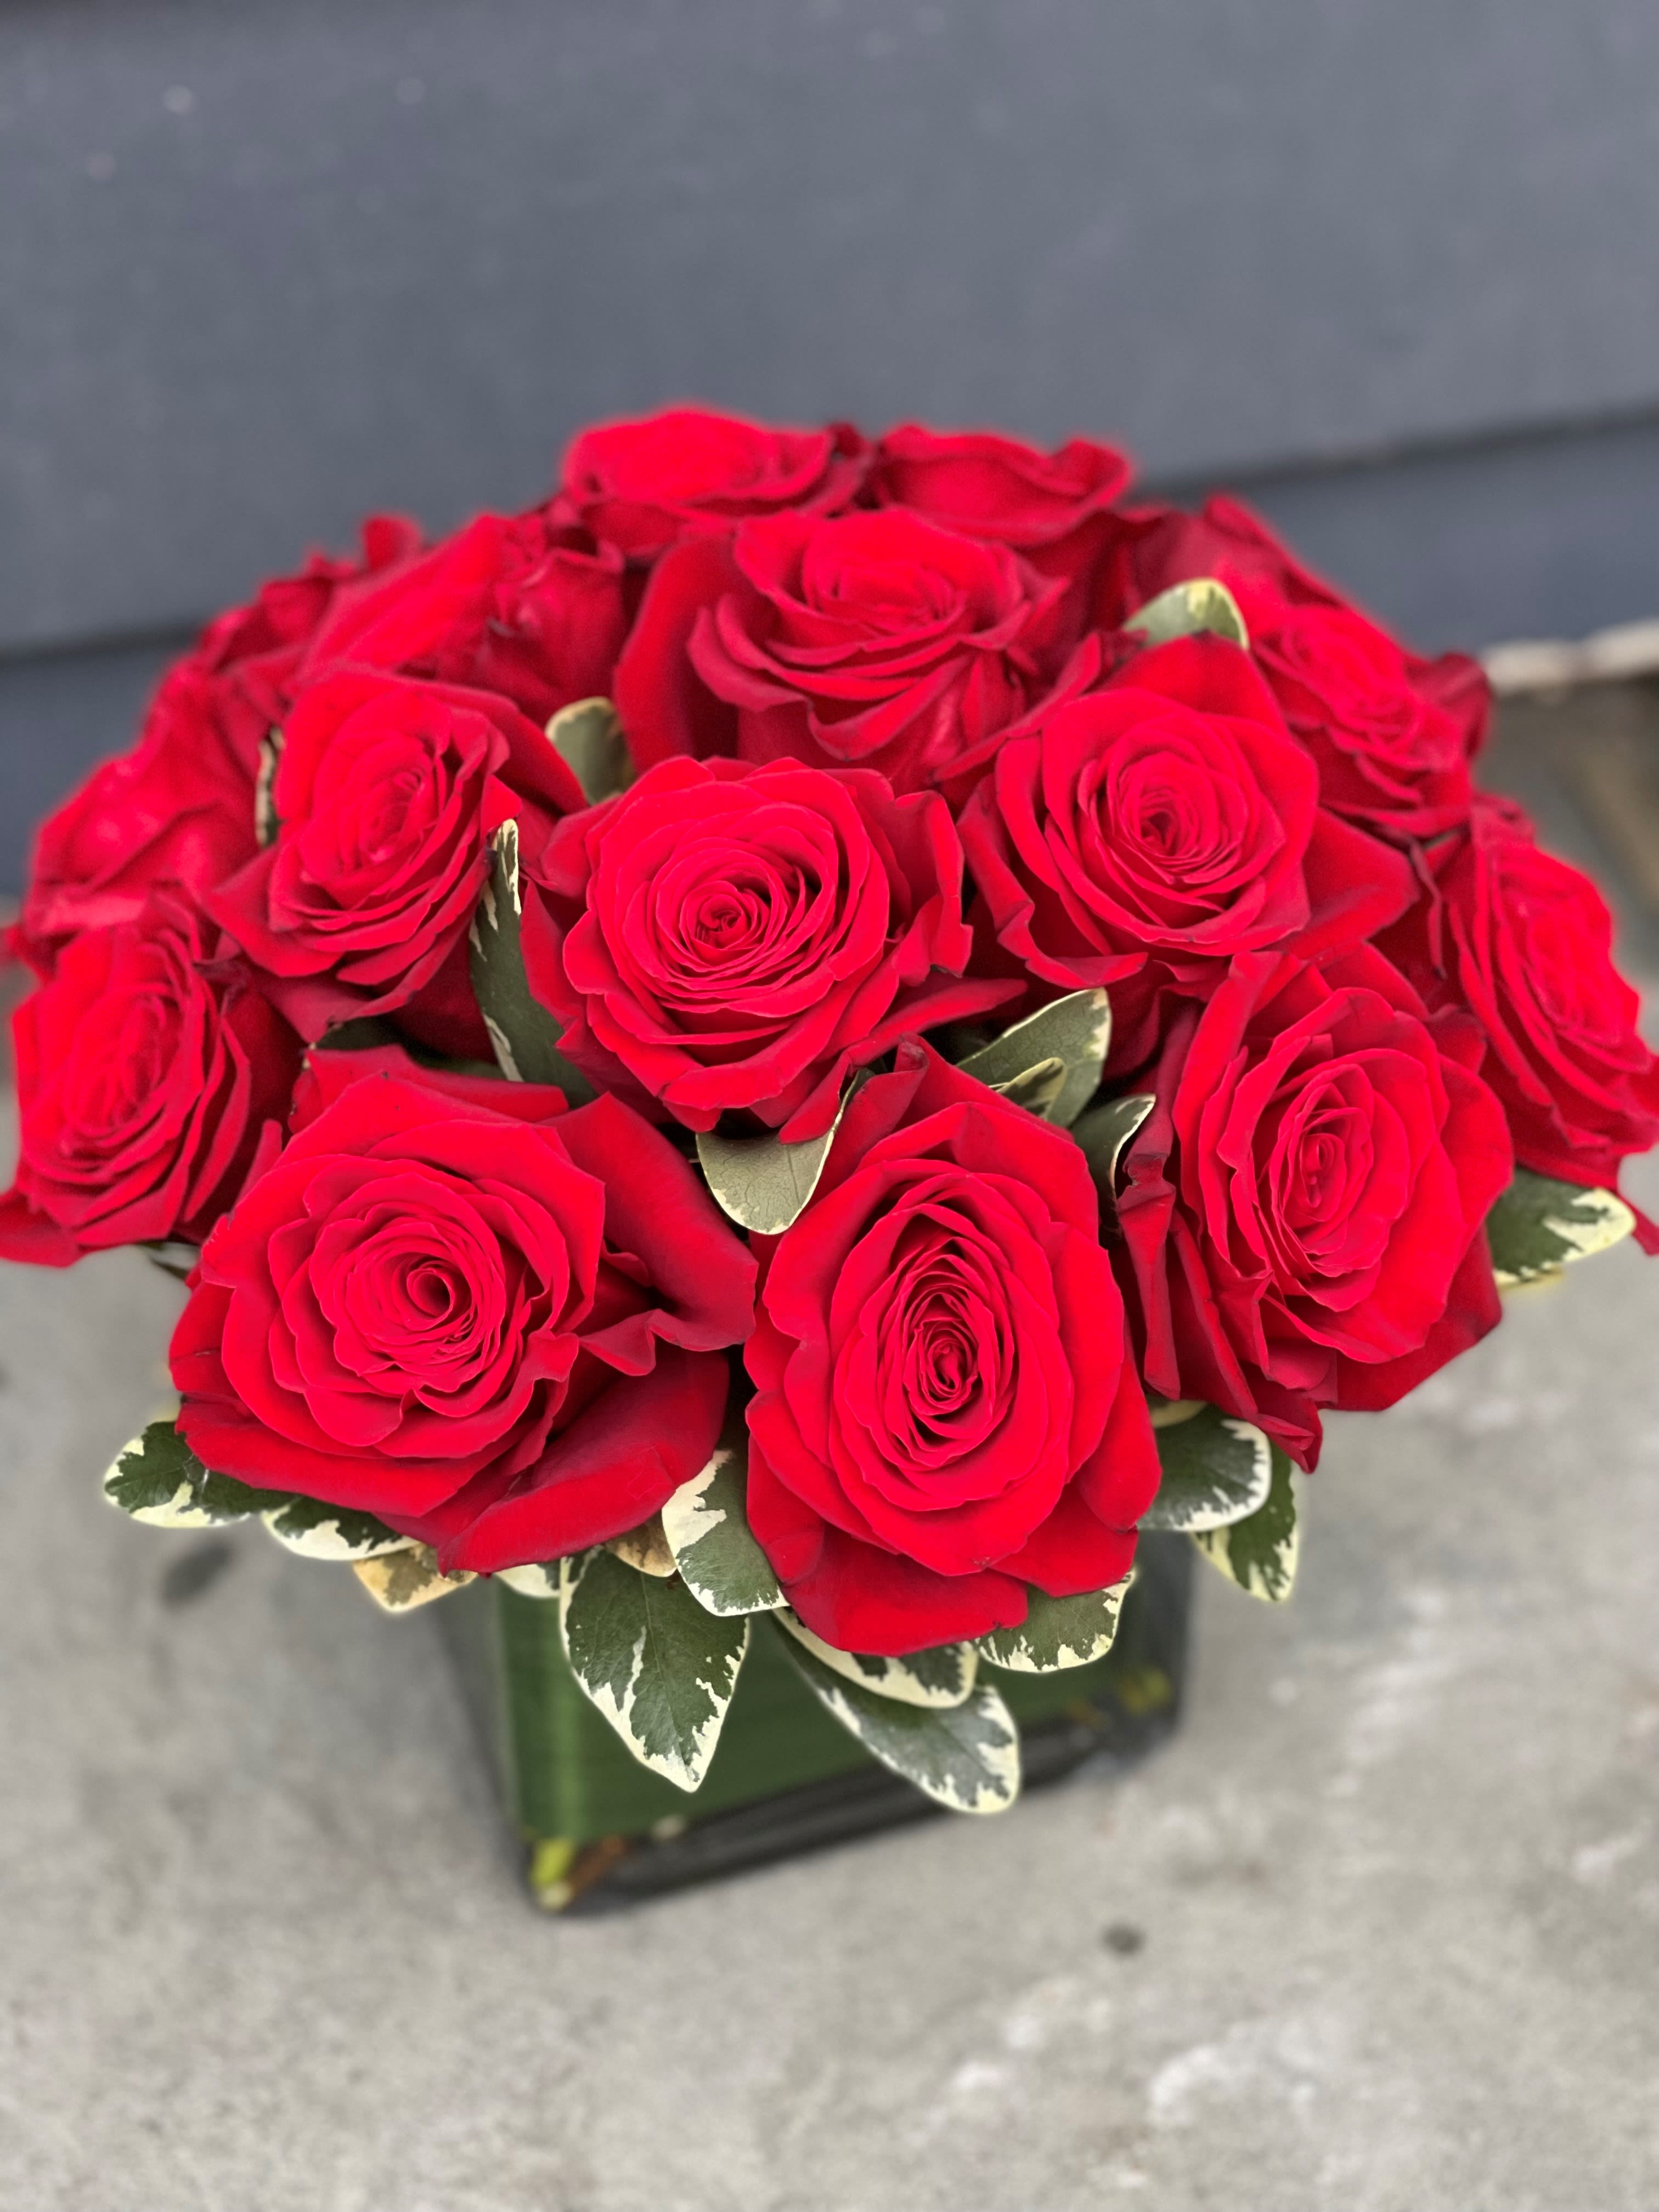 Premium Dozen Red Rose Contempo - A dozen lush red roses, arranged into an leaf lined cube, is an instant classic. It's traditional yet modern, and simply perfect. 